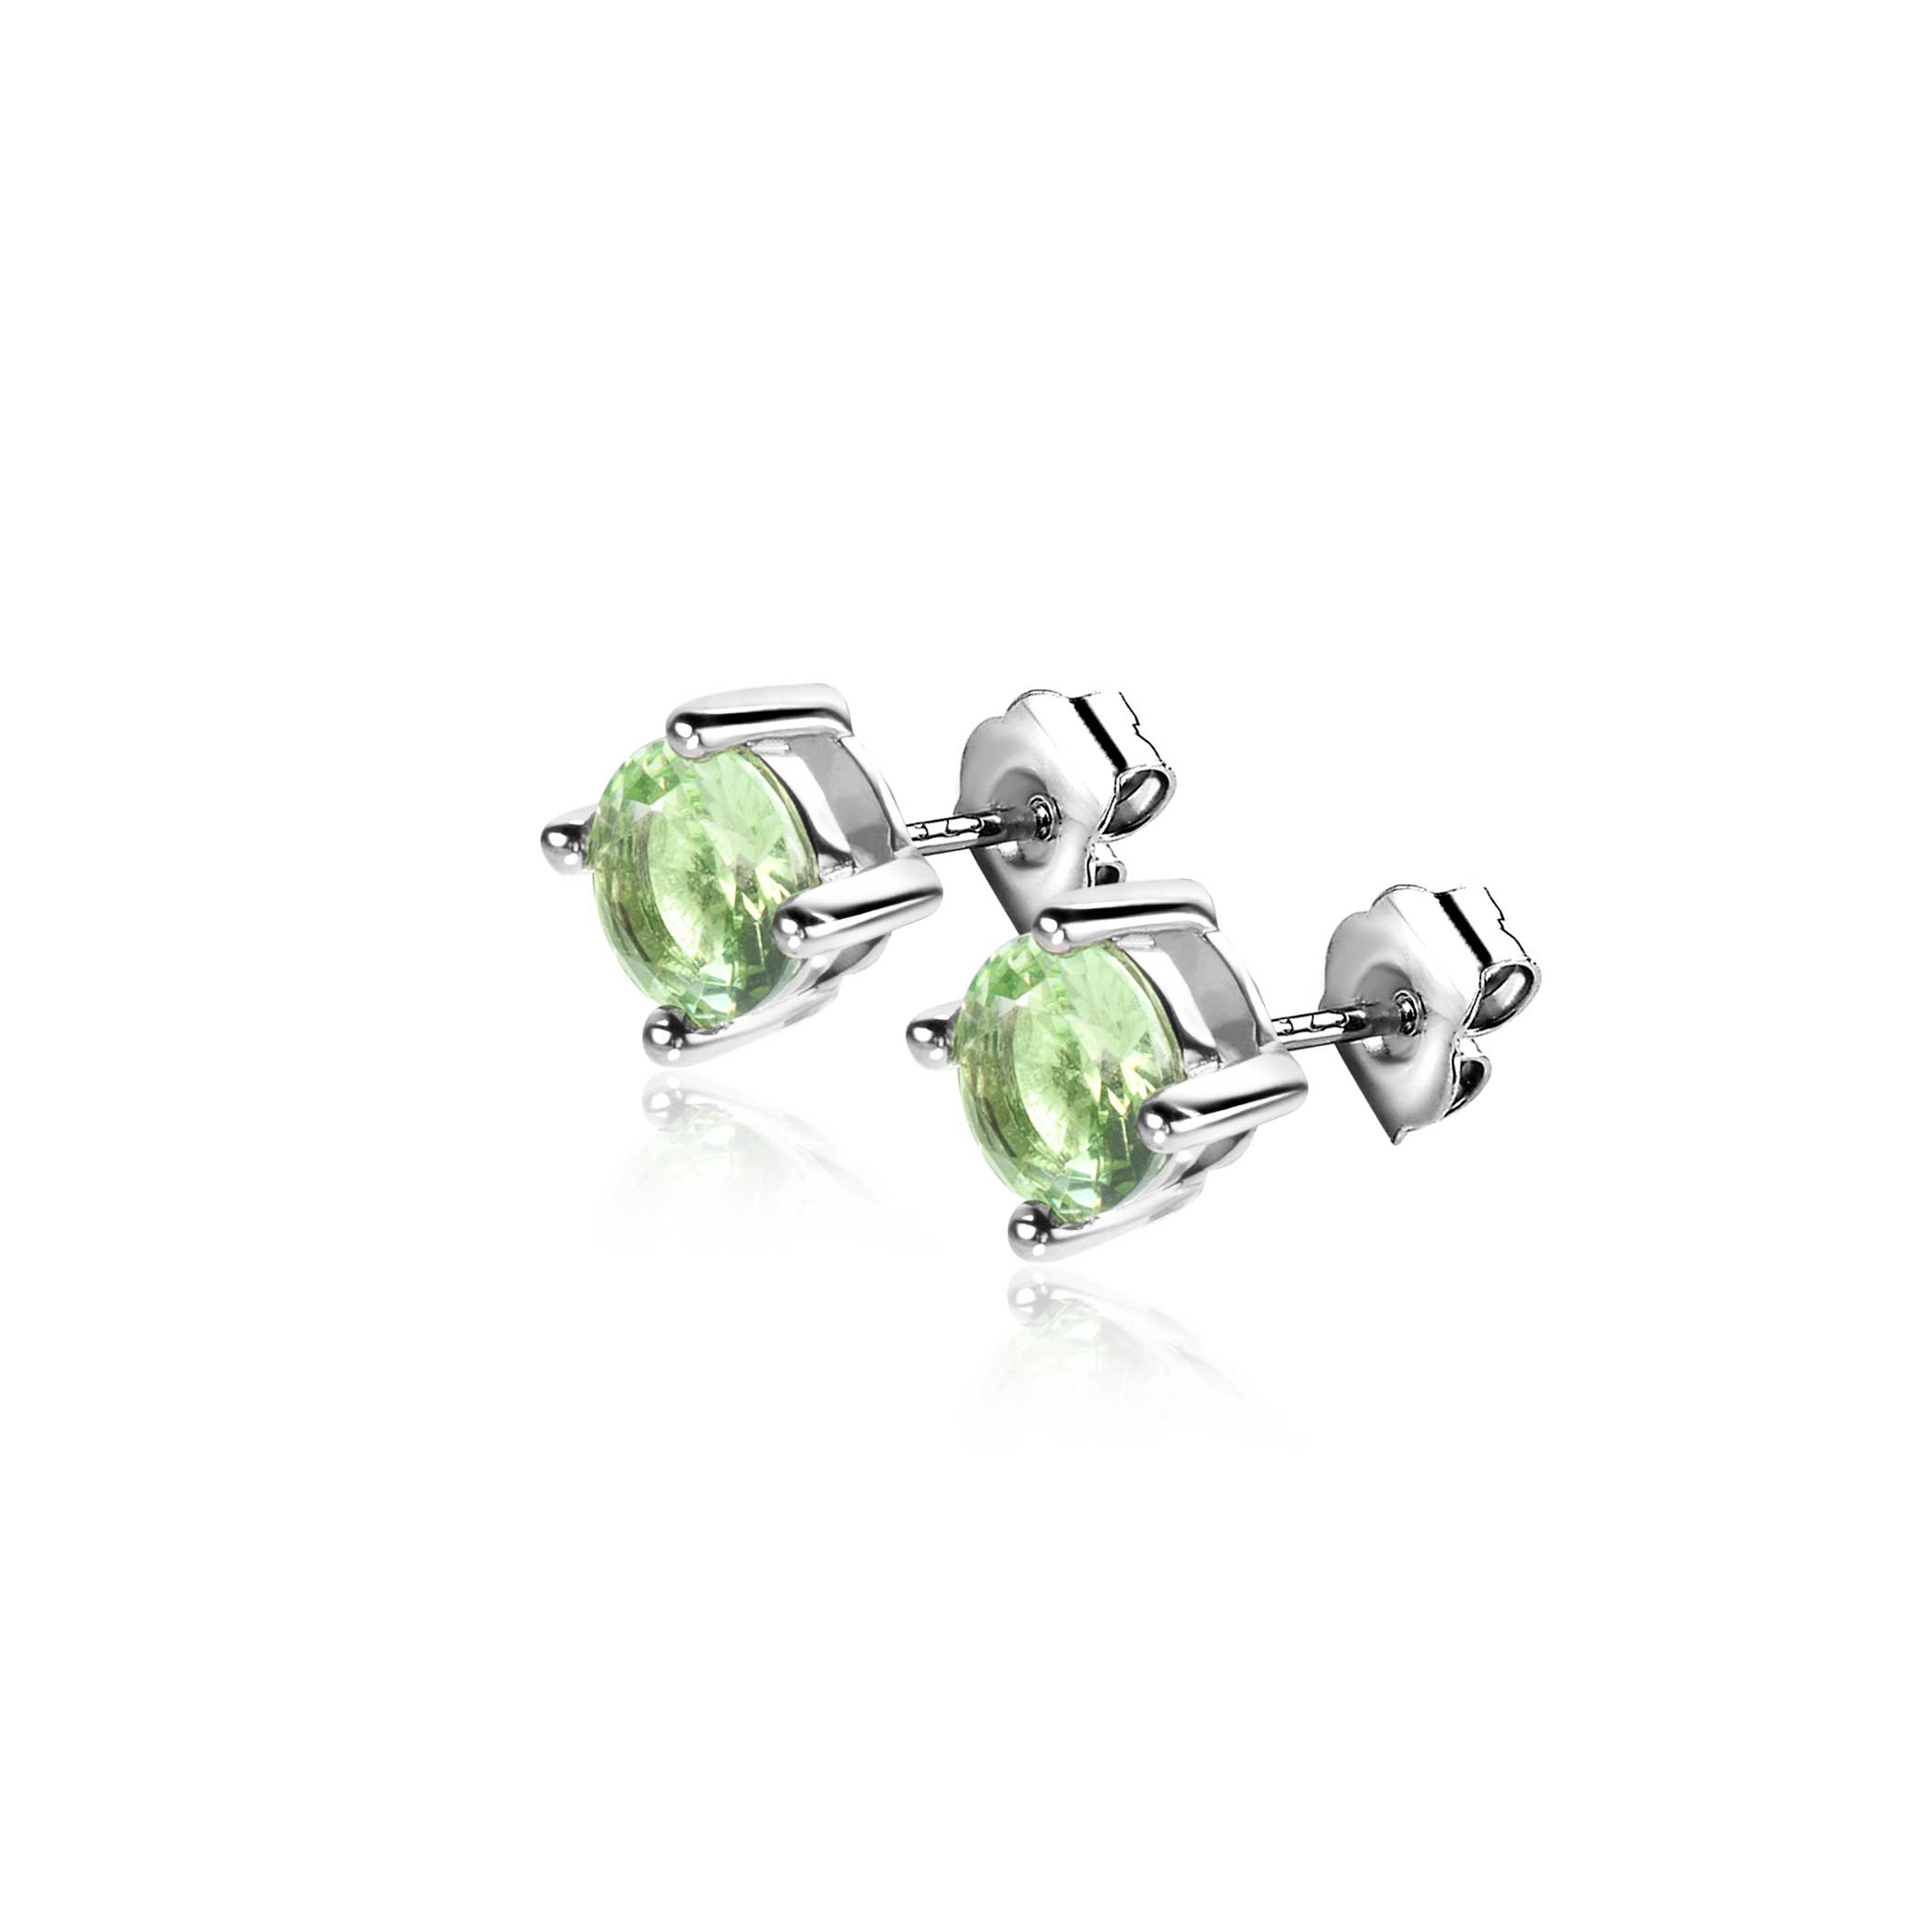 6mm ZINZI Sterling Silver Stud Earrings Prong Setting Light Green Color Stone ZIO1383G